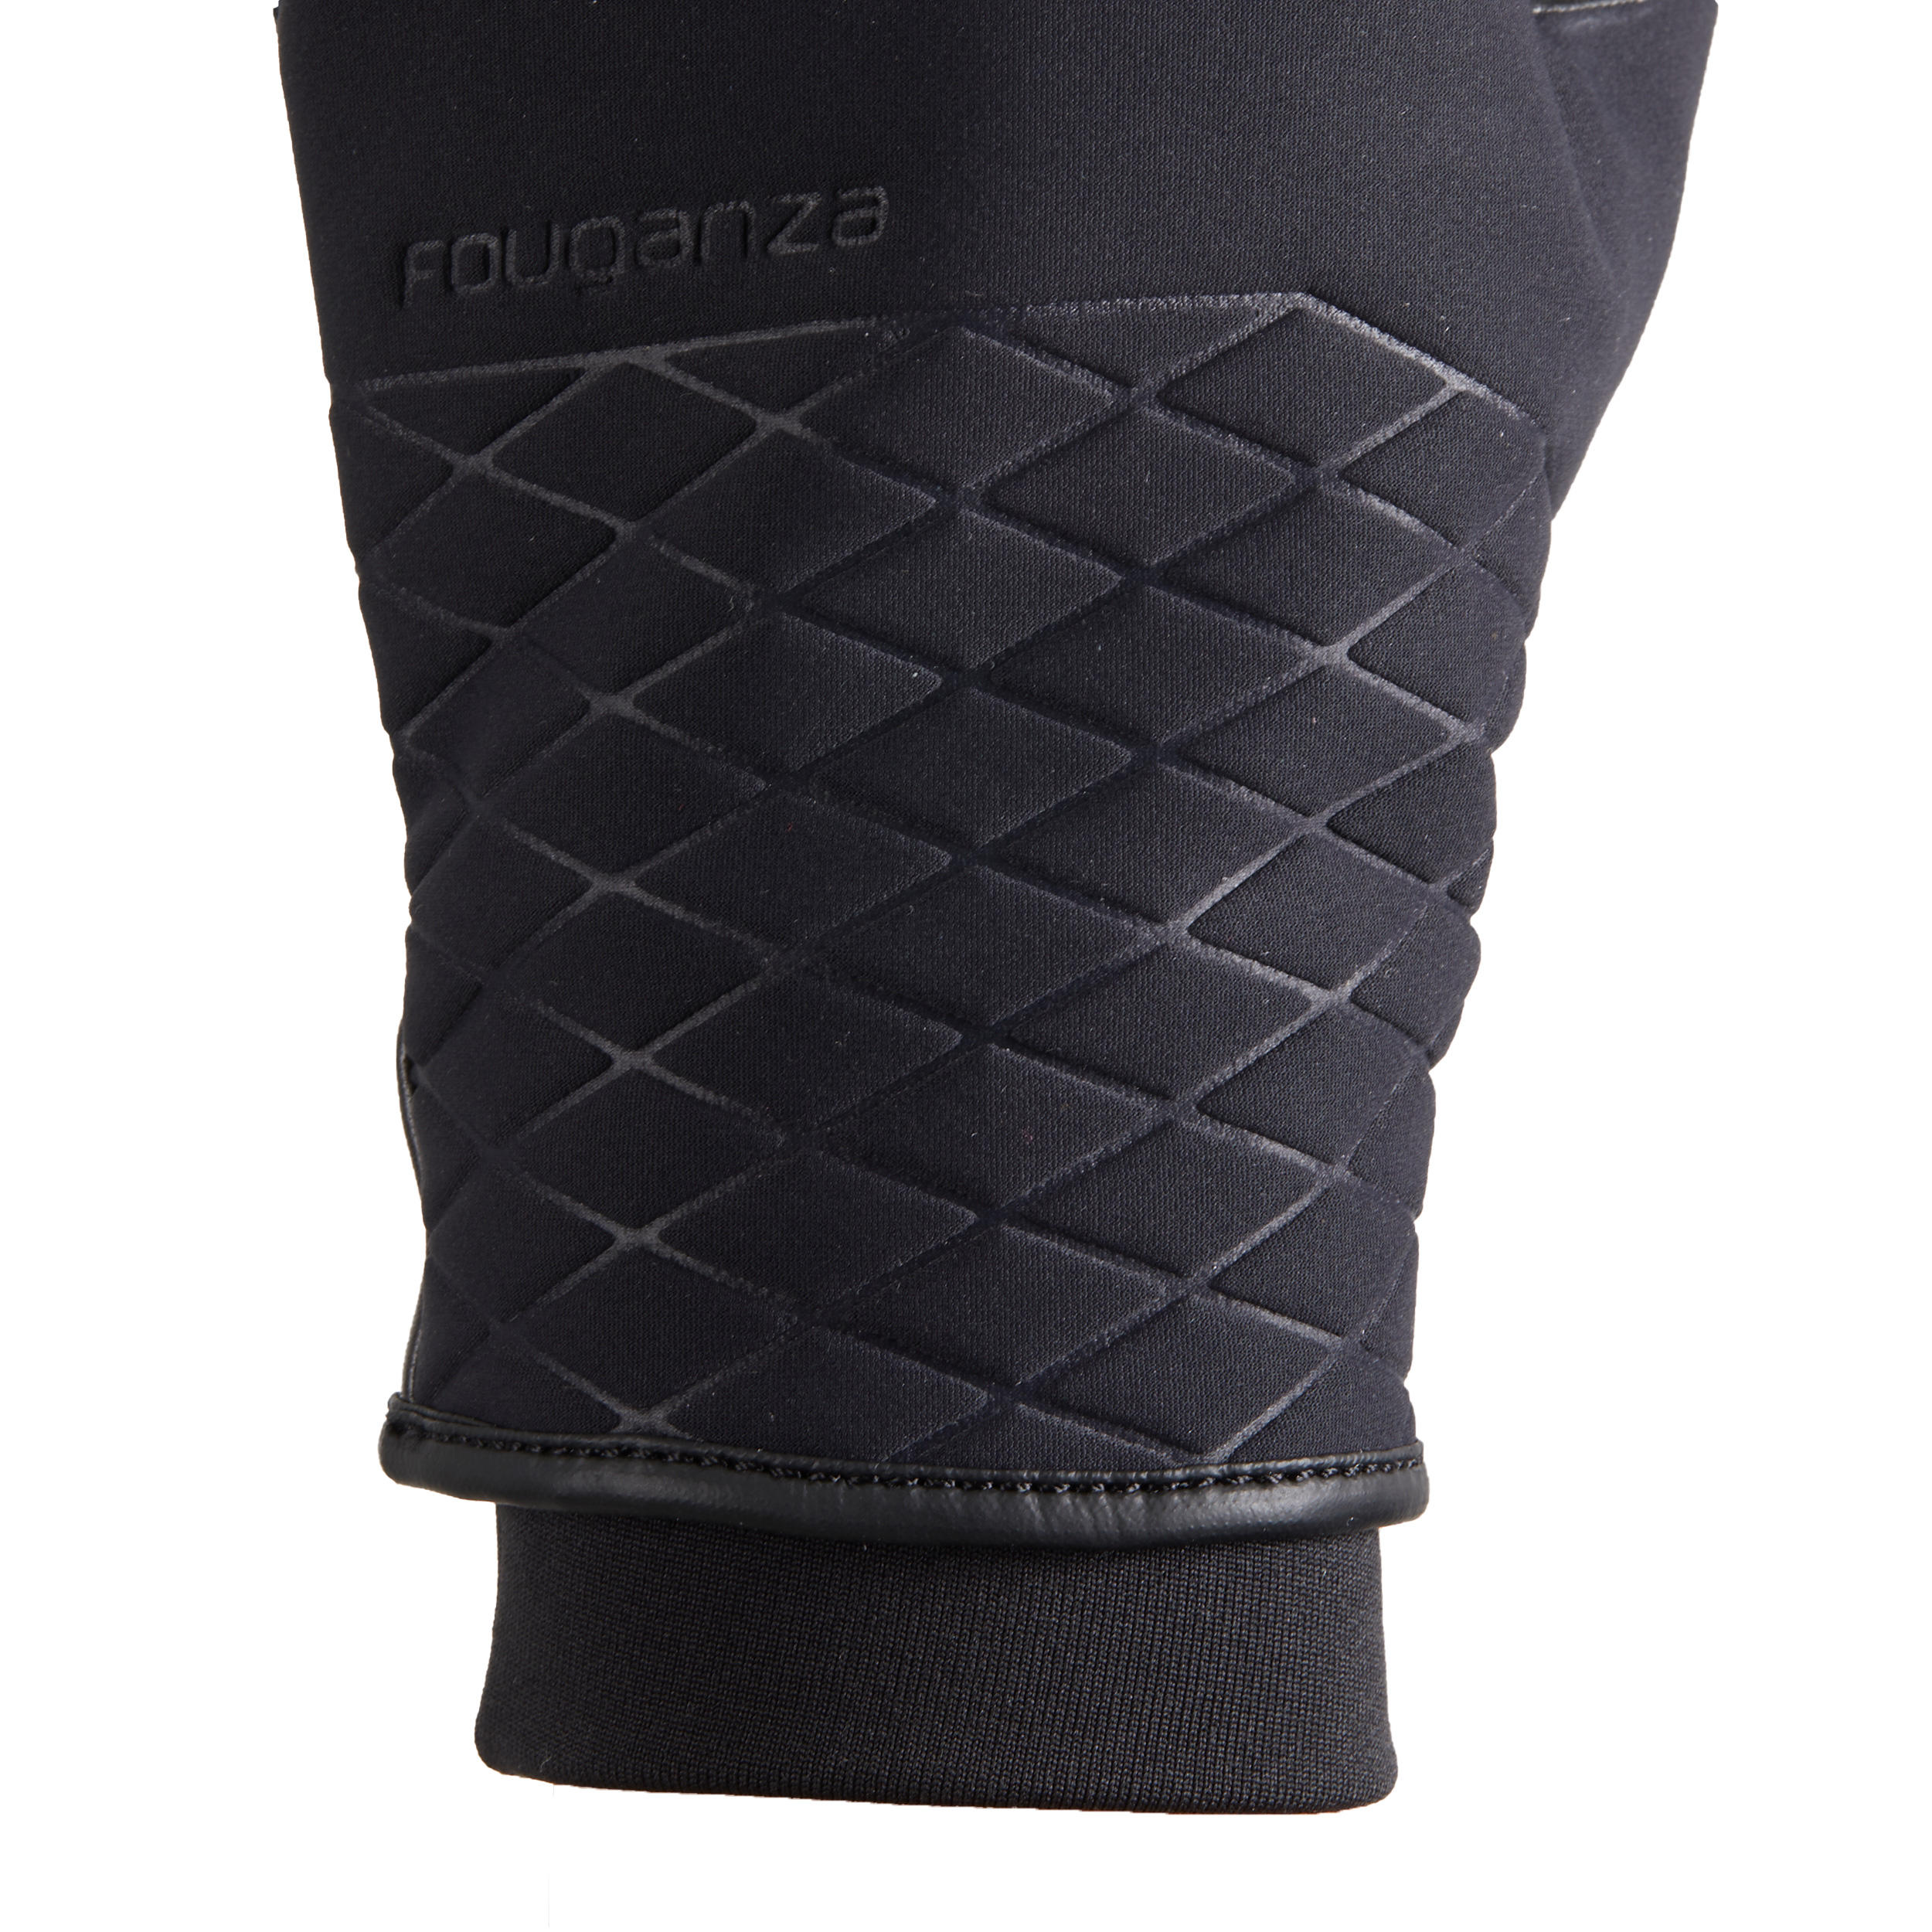 Women's Warm and Waterproof Horse Riding Gloves 900 Warm - Black 3/5